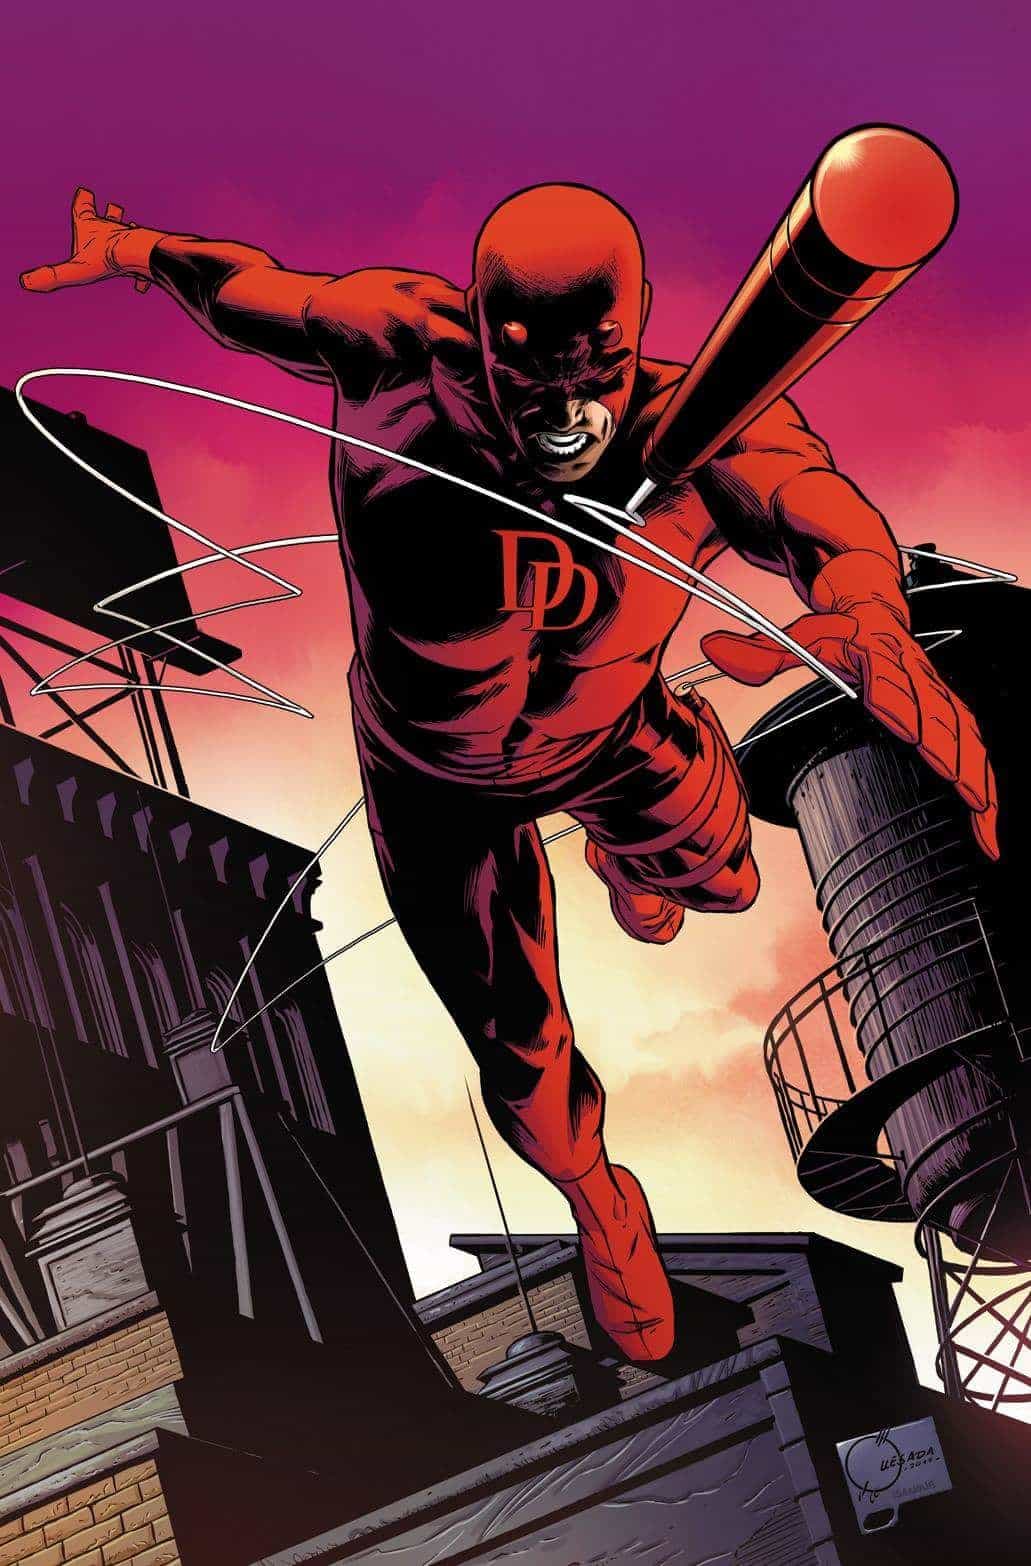 Marvel Comics Legacy And Daredevil 600 Spoilers Marvel Entertainment Chief Creative Officer